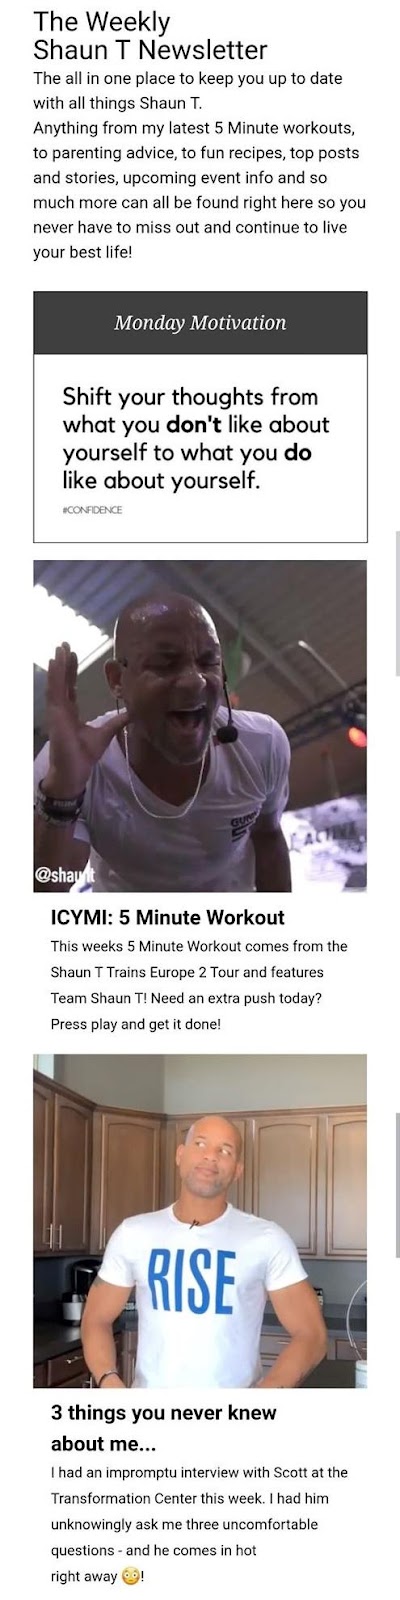 example from celebrity personal trainer, Shaun T.